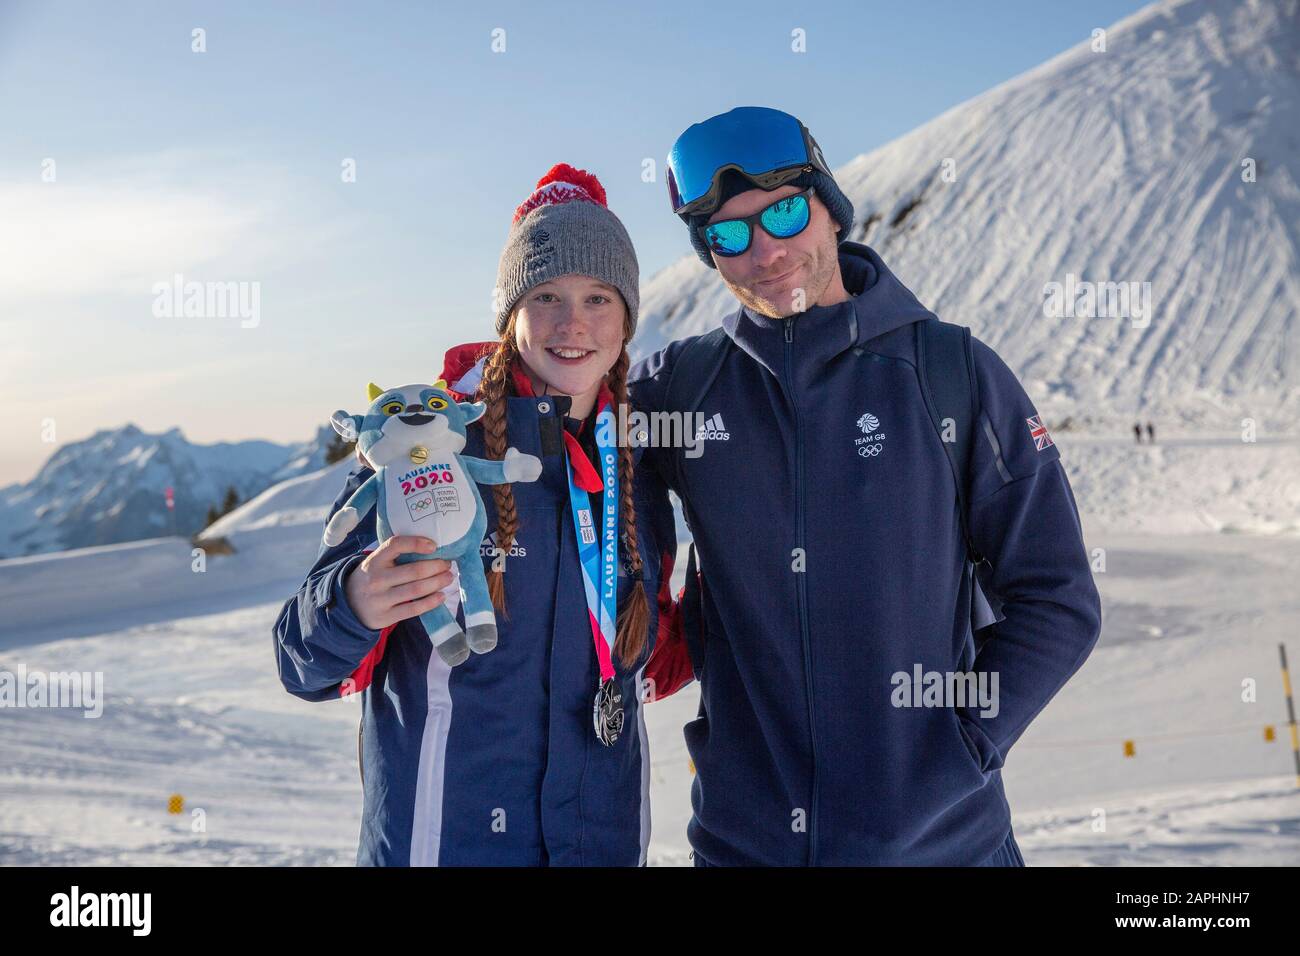 Team GB’s Kirsty Muir (15) following winning silver at Women’s Freeski Big Air with coach Joe Tyler during the Lausanne 2020 Youth Olympic Games. Stock Photo